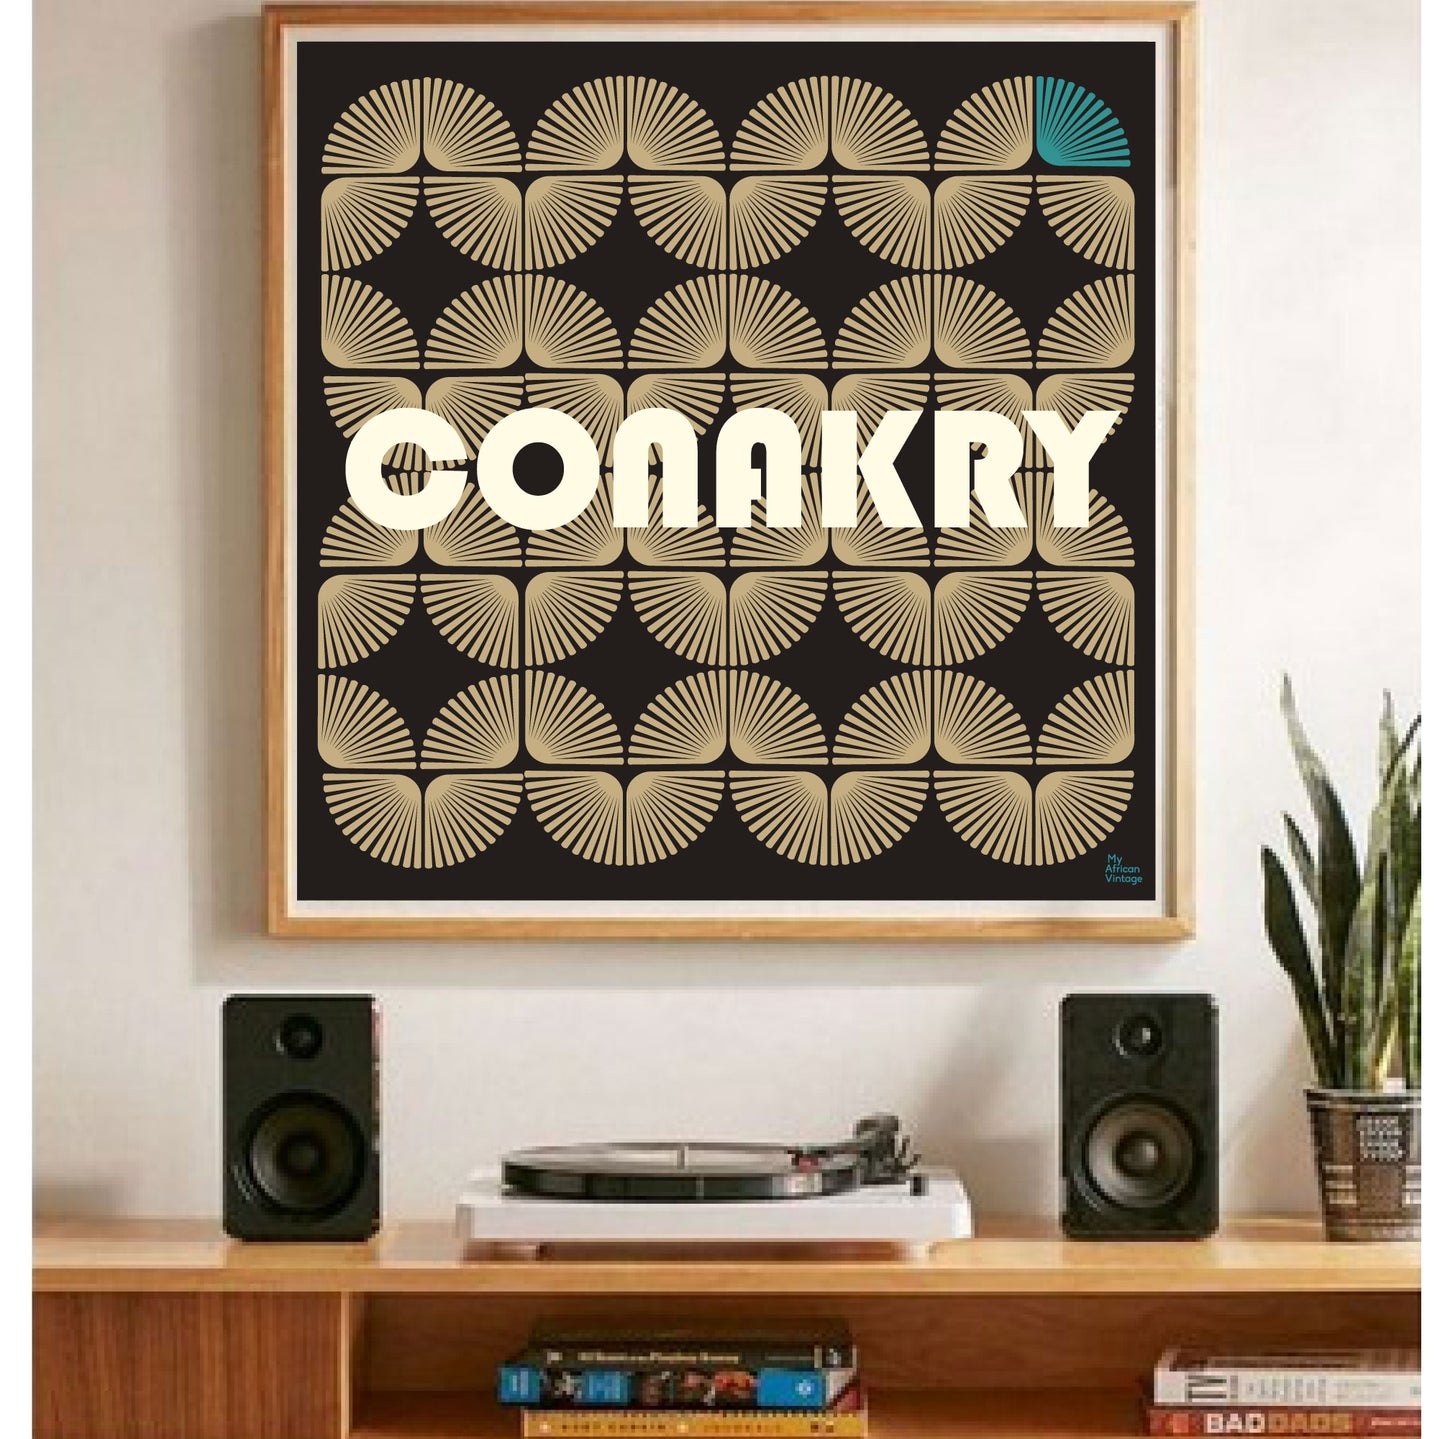 Affiche style rétro "Conakry" - collection "My African Vintage"